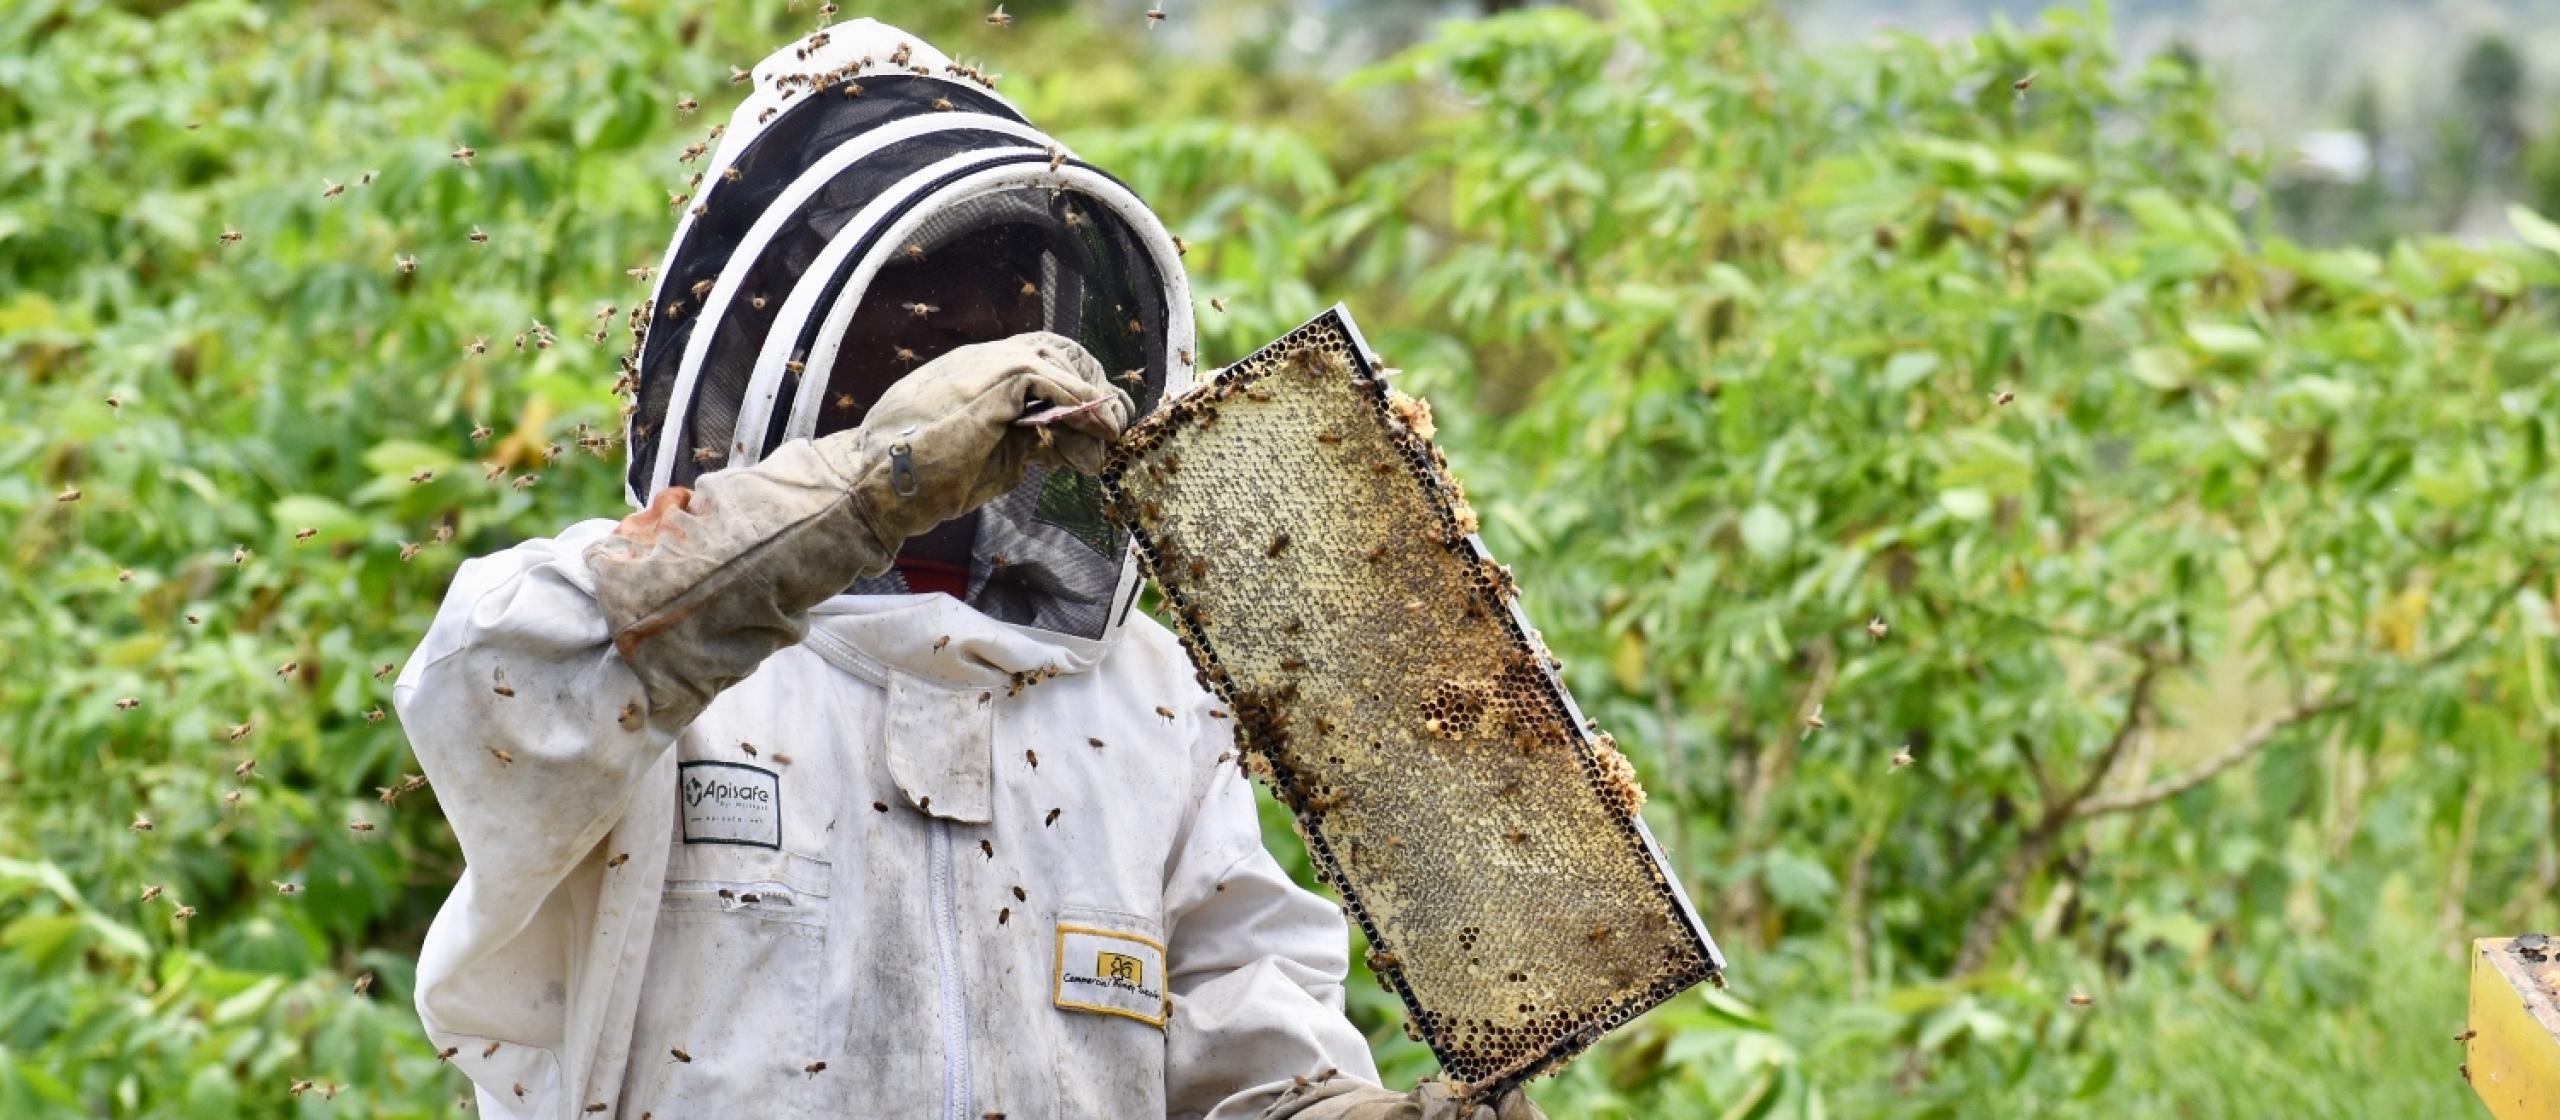 Beekeeper taking frame out of beehive